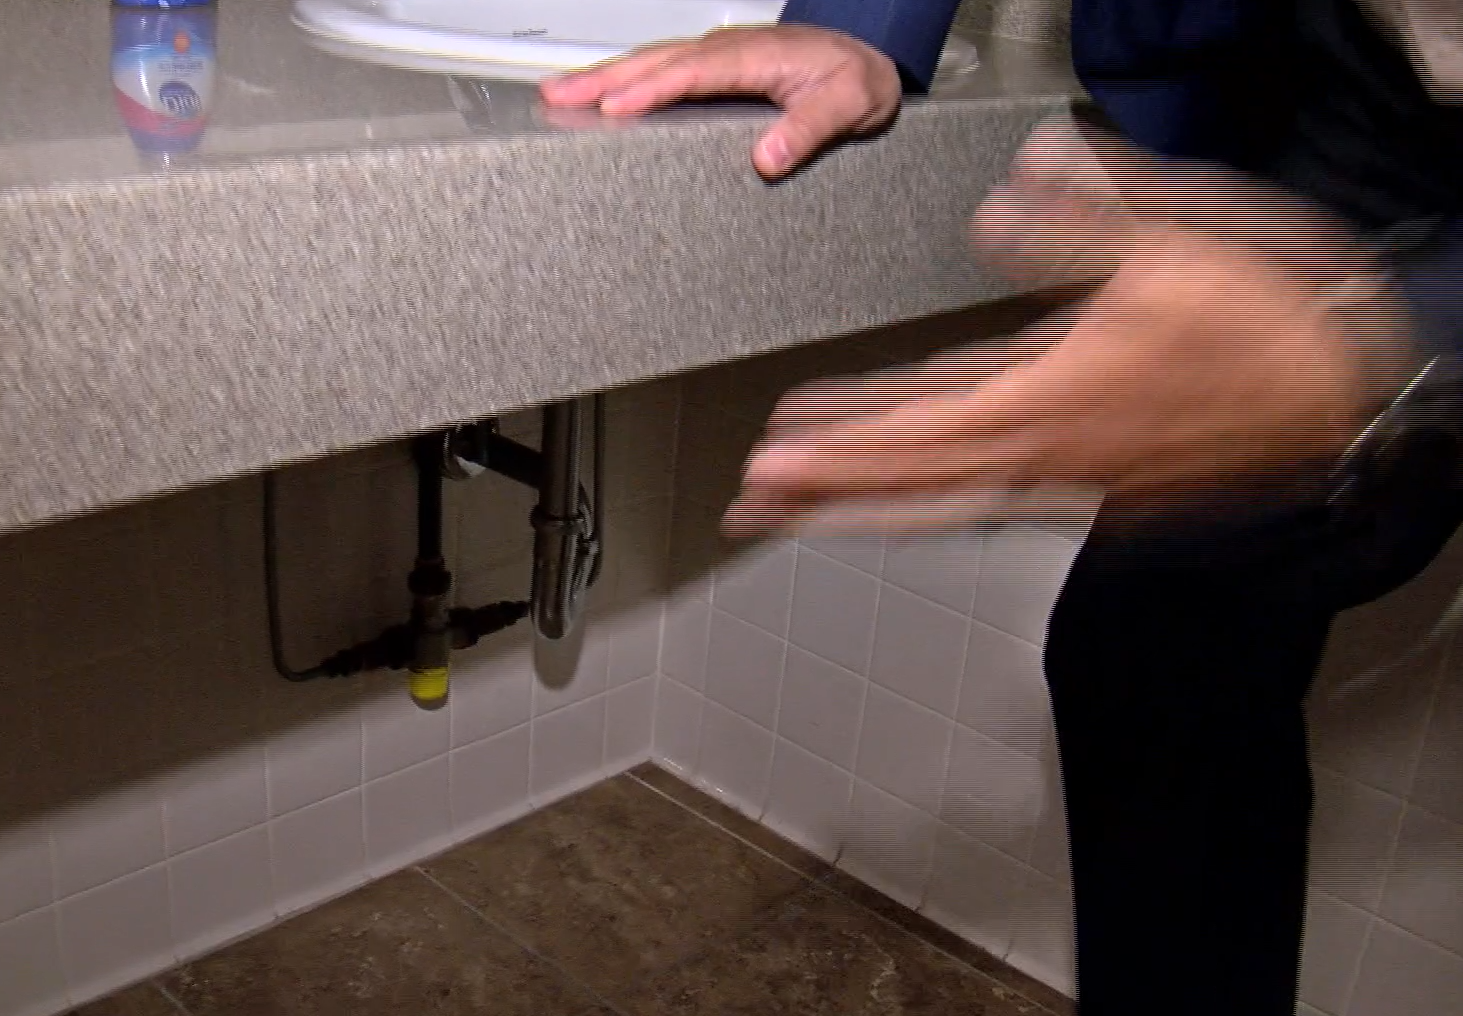 dawes cooke recommends hidden cam in toilet bowl pic